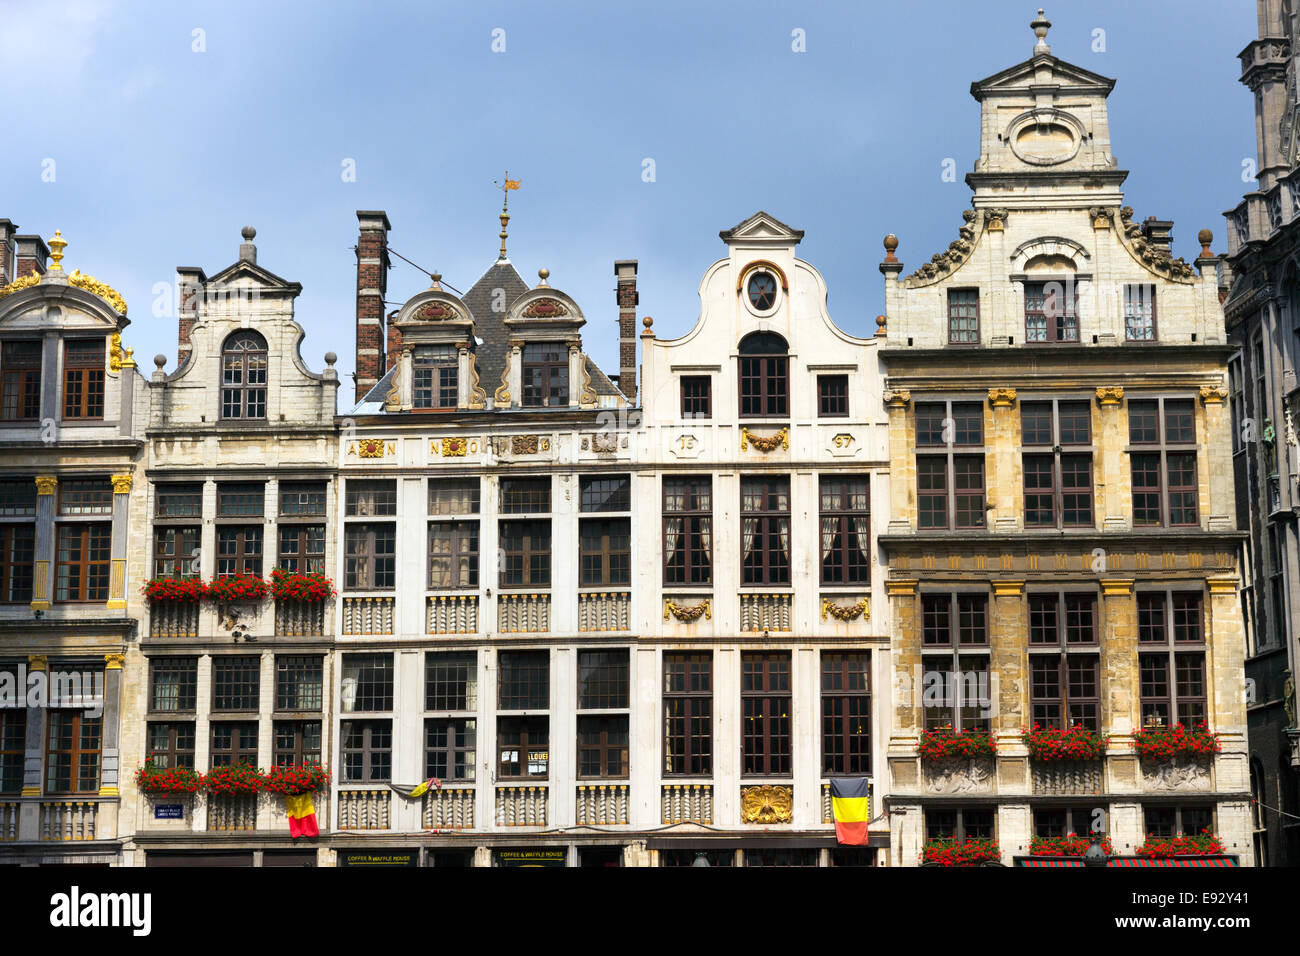 Famous old colorful buildings at Market square in Brussels. Belgium Stock Photo